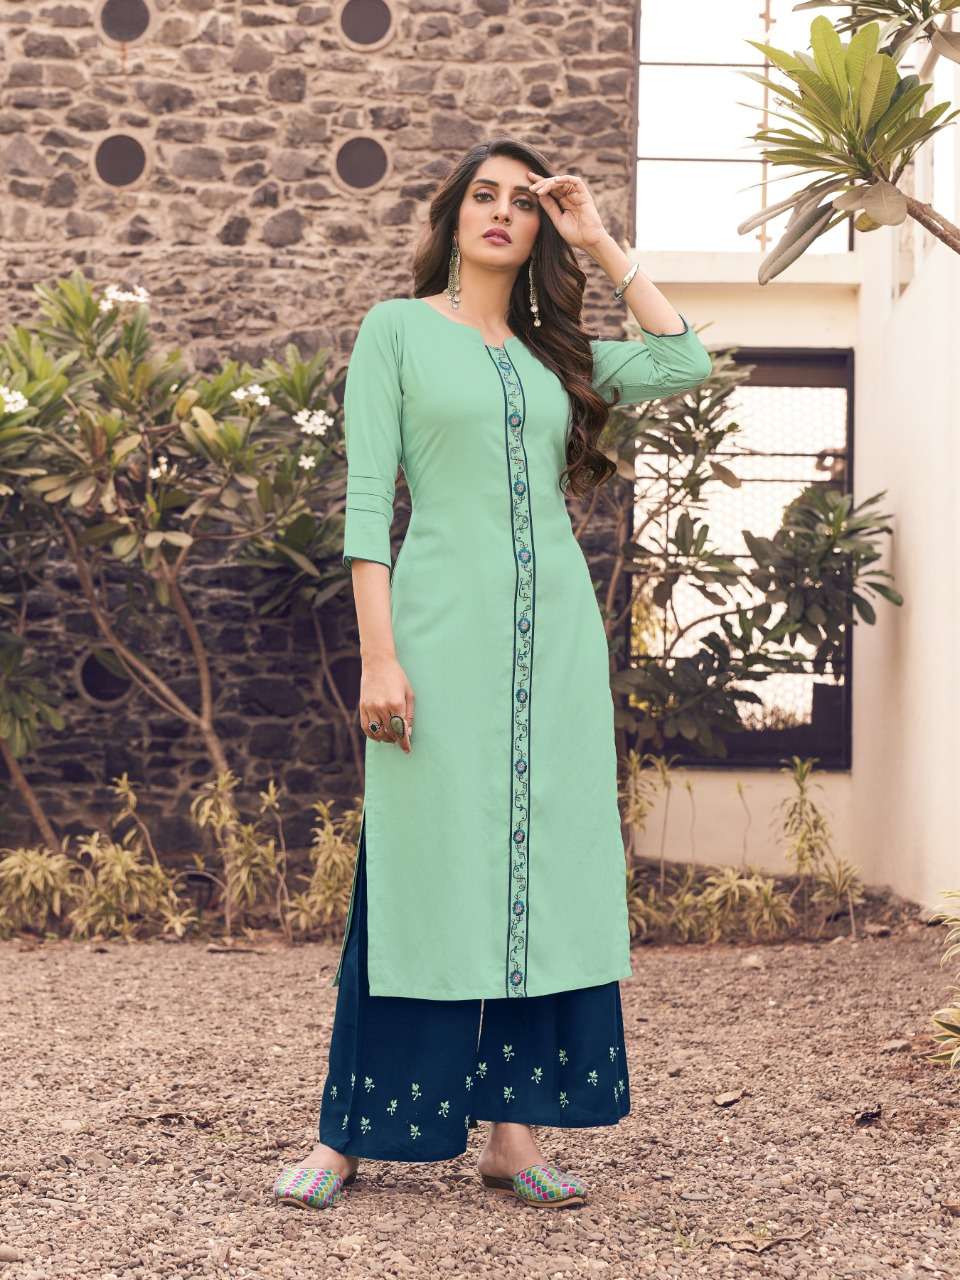 Discover the Latest Trends in Designer Kurtis Online for Women – Handloom,  Cotton, and More! - Sanskriti Cuttack